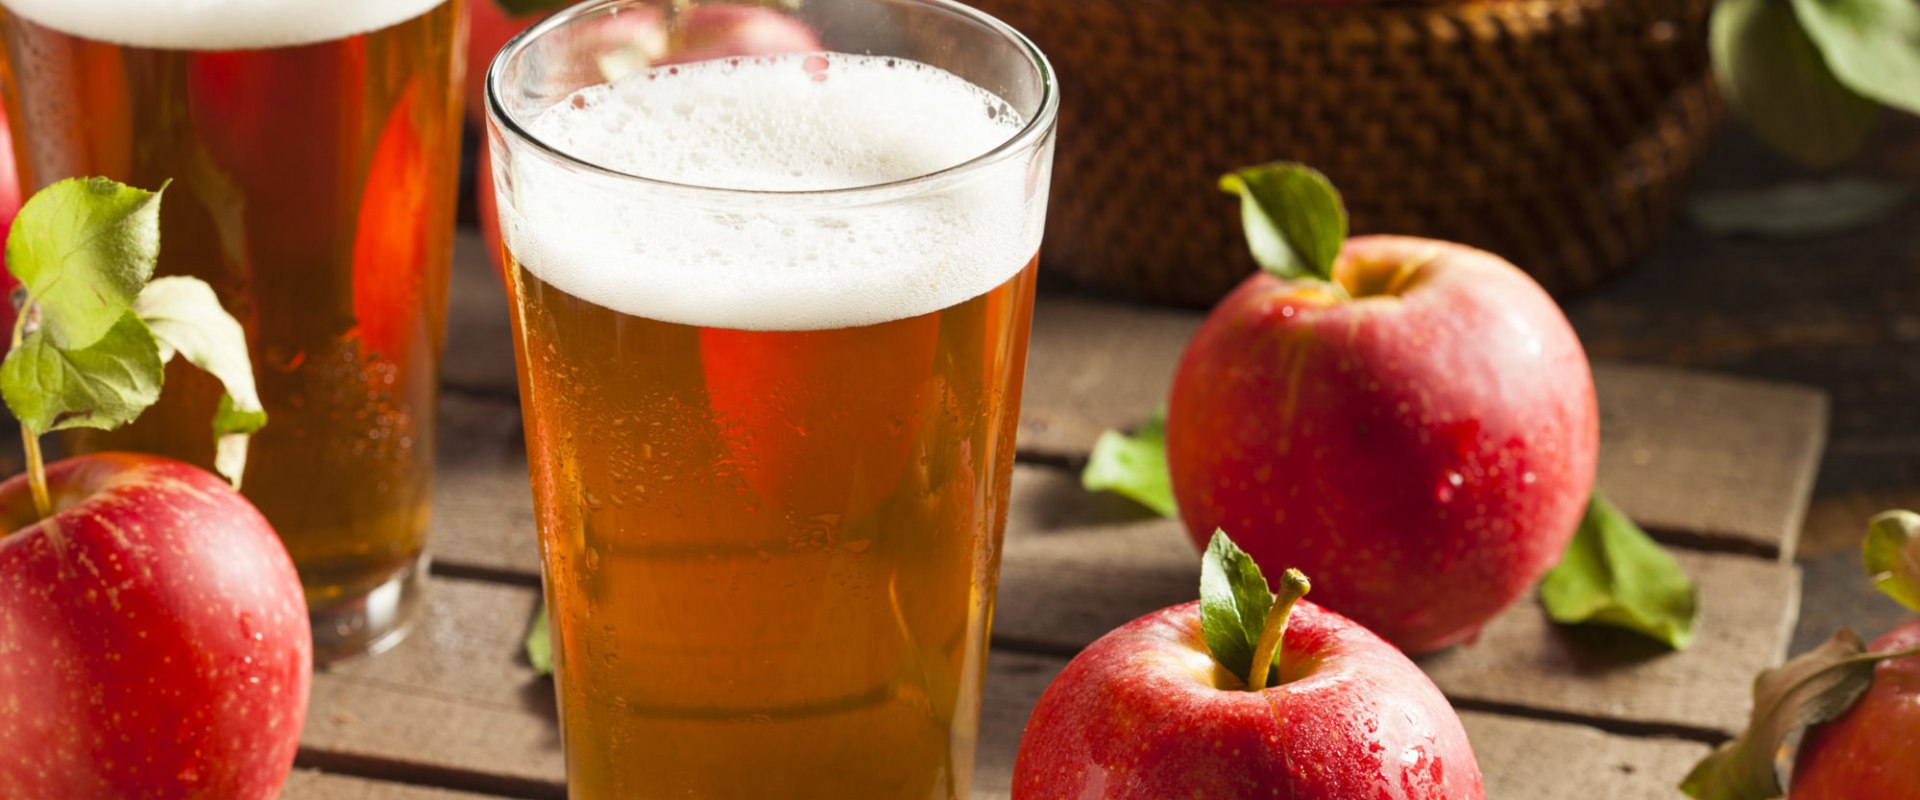 What are ciders good for?